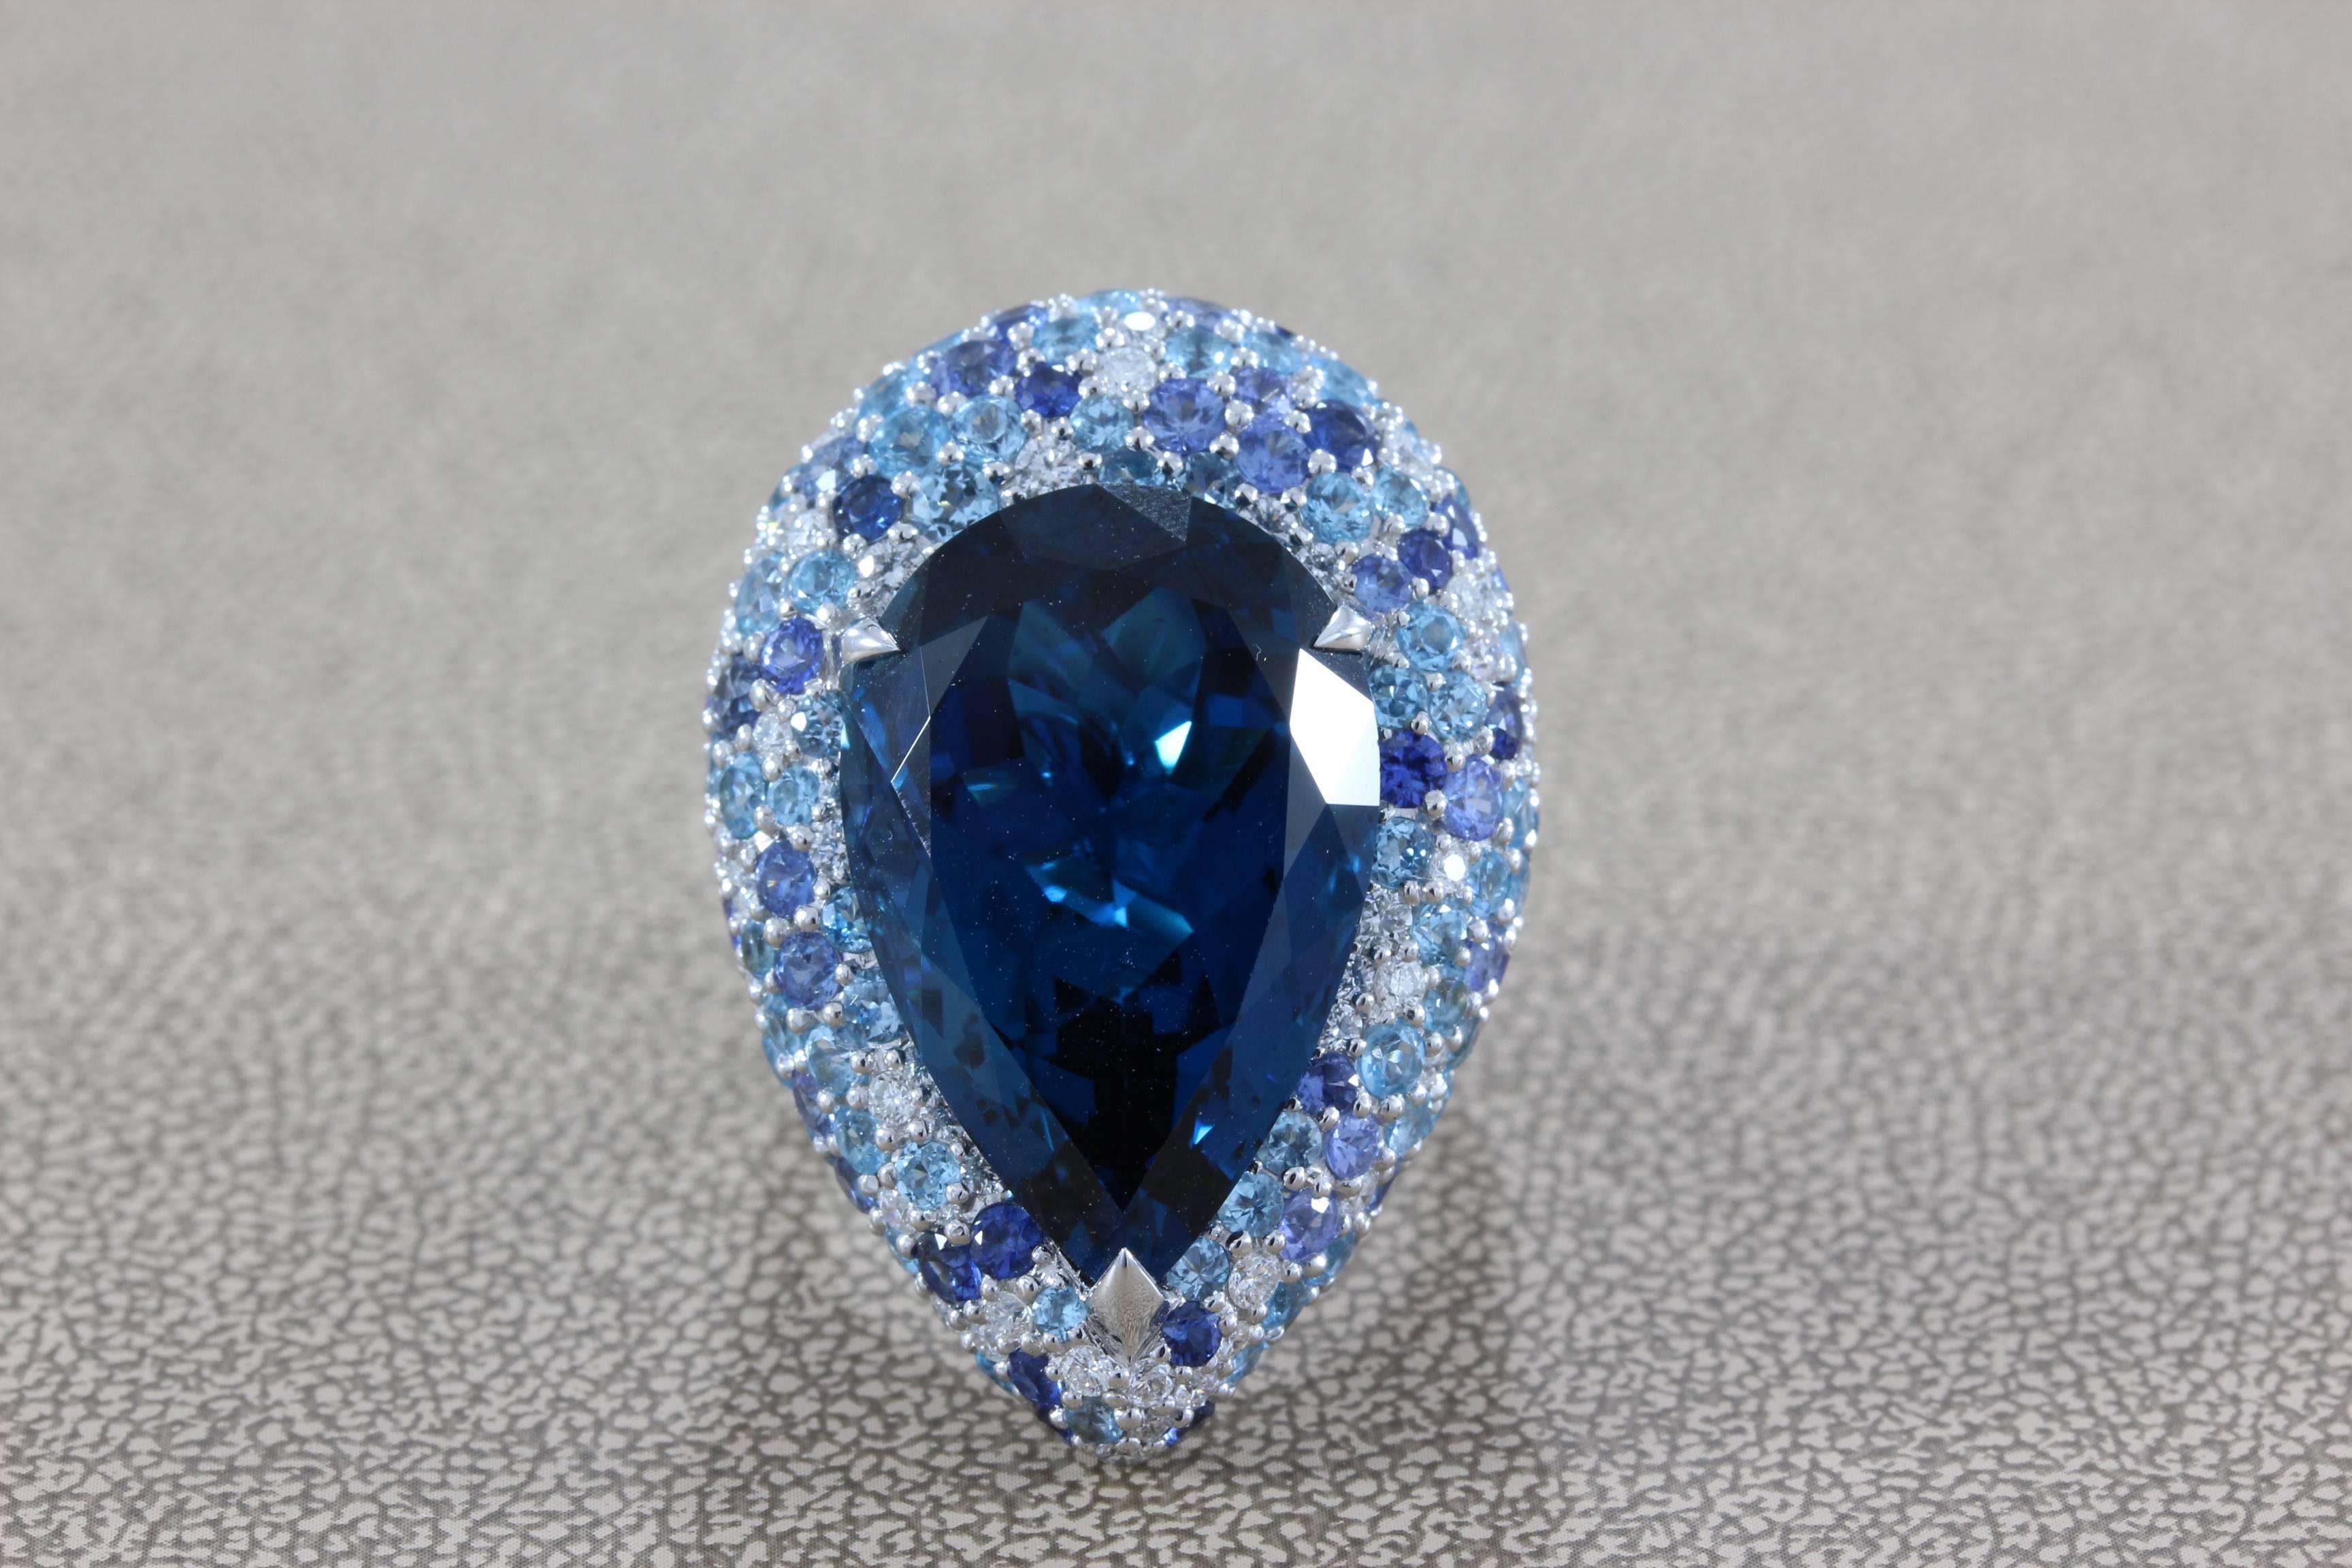 A large cocktail ring featuring a 25.76 carat pear shape blue topaz which is cut to perfection. Surrounding the center stone is a cluster of round cut diamonds and sapphires, set in 18K white gold, which total to 5.69 carats. A bold ring for a